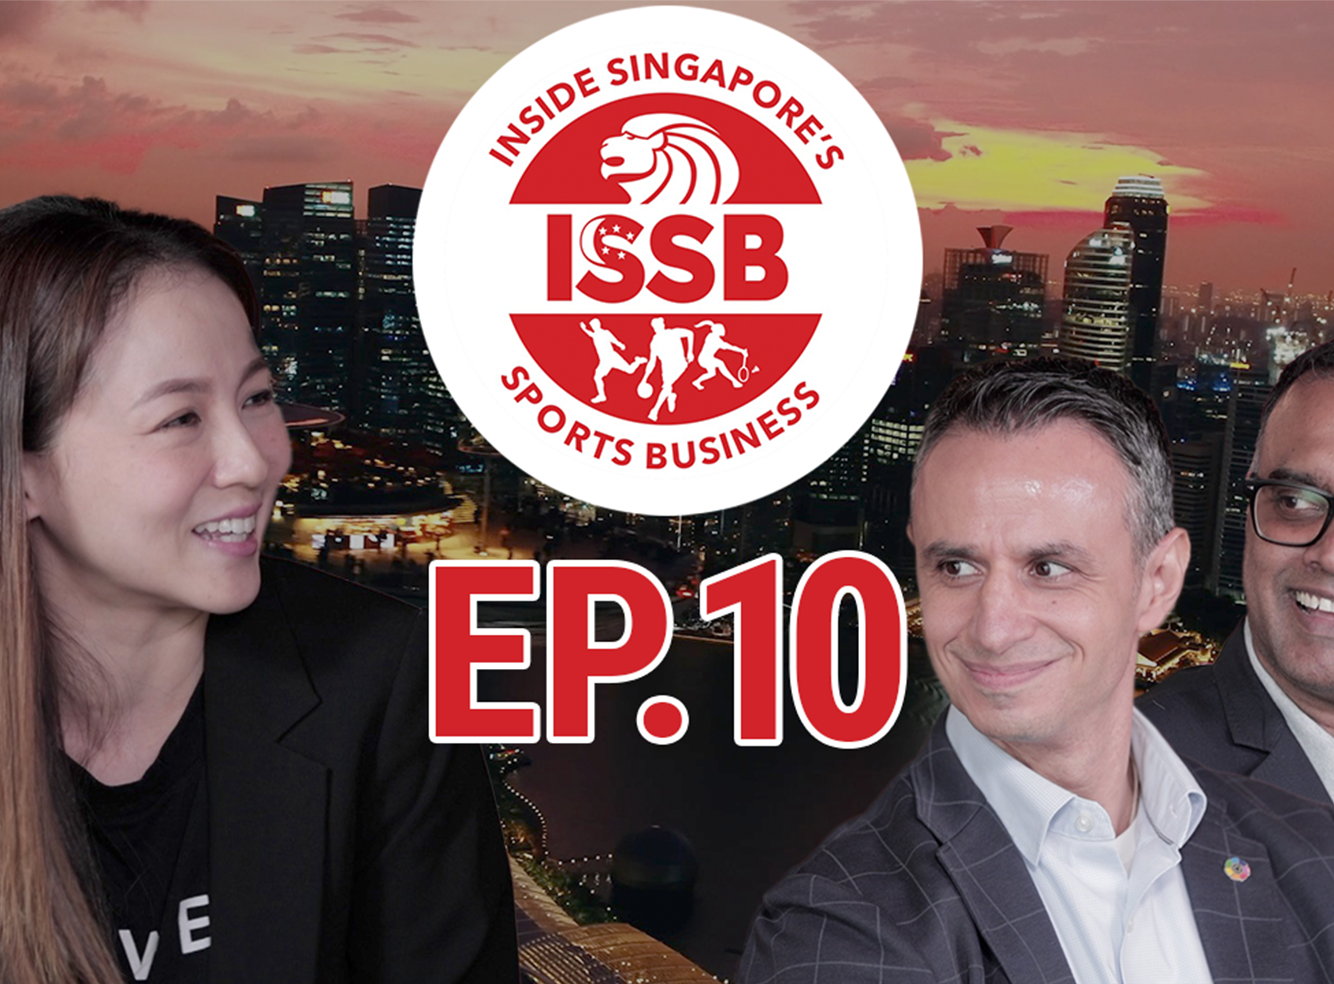 Ep 10 - The Football Industry in Singapore vs. the Rest of Asia